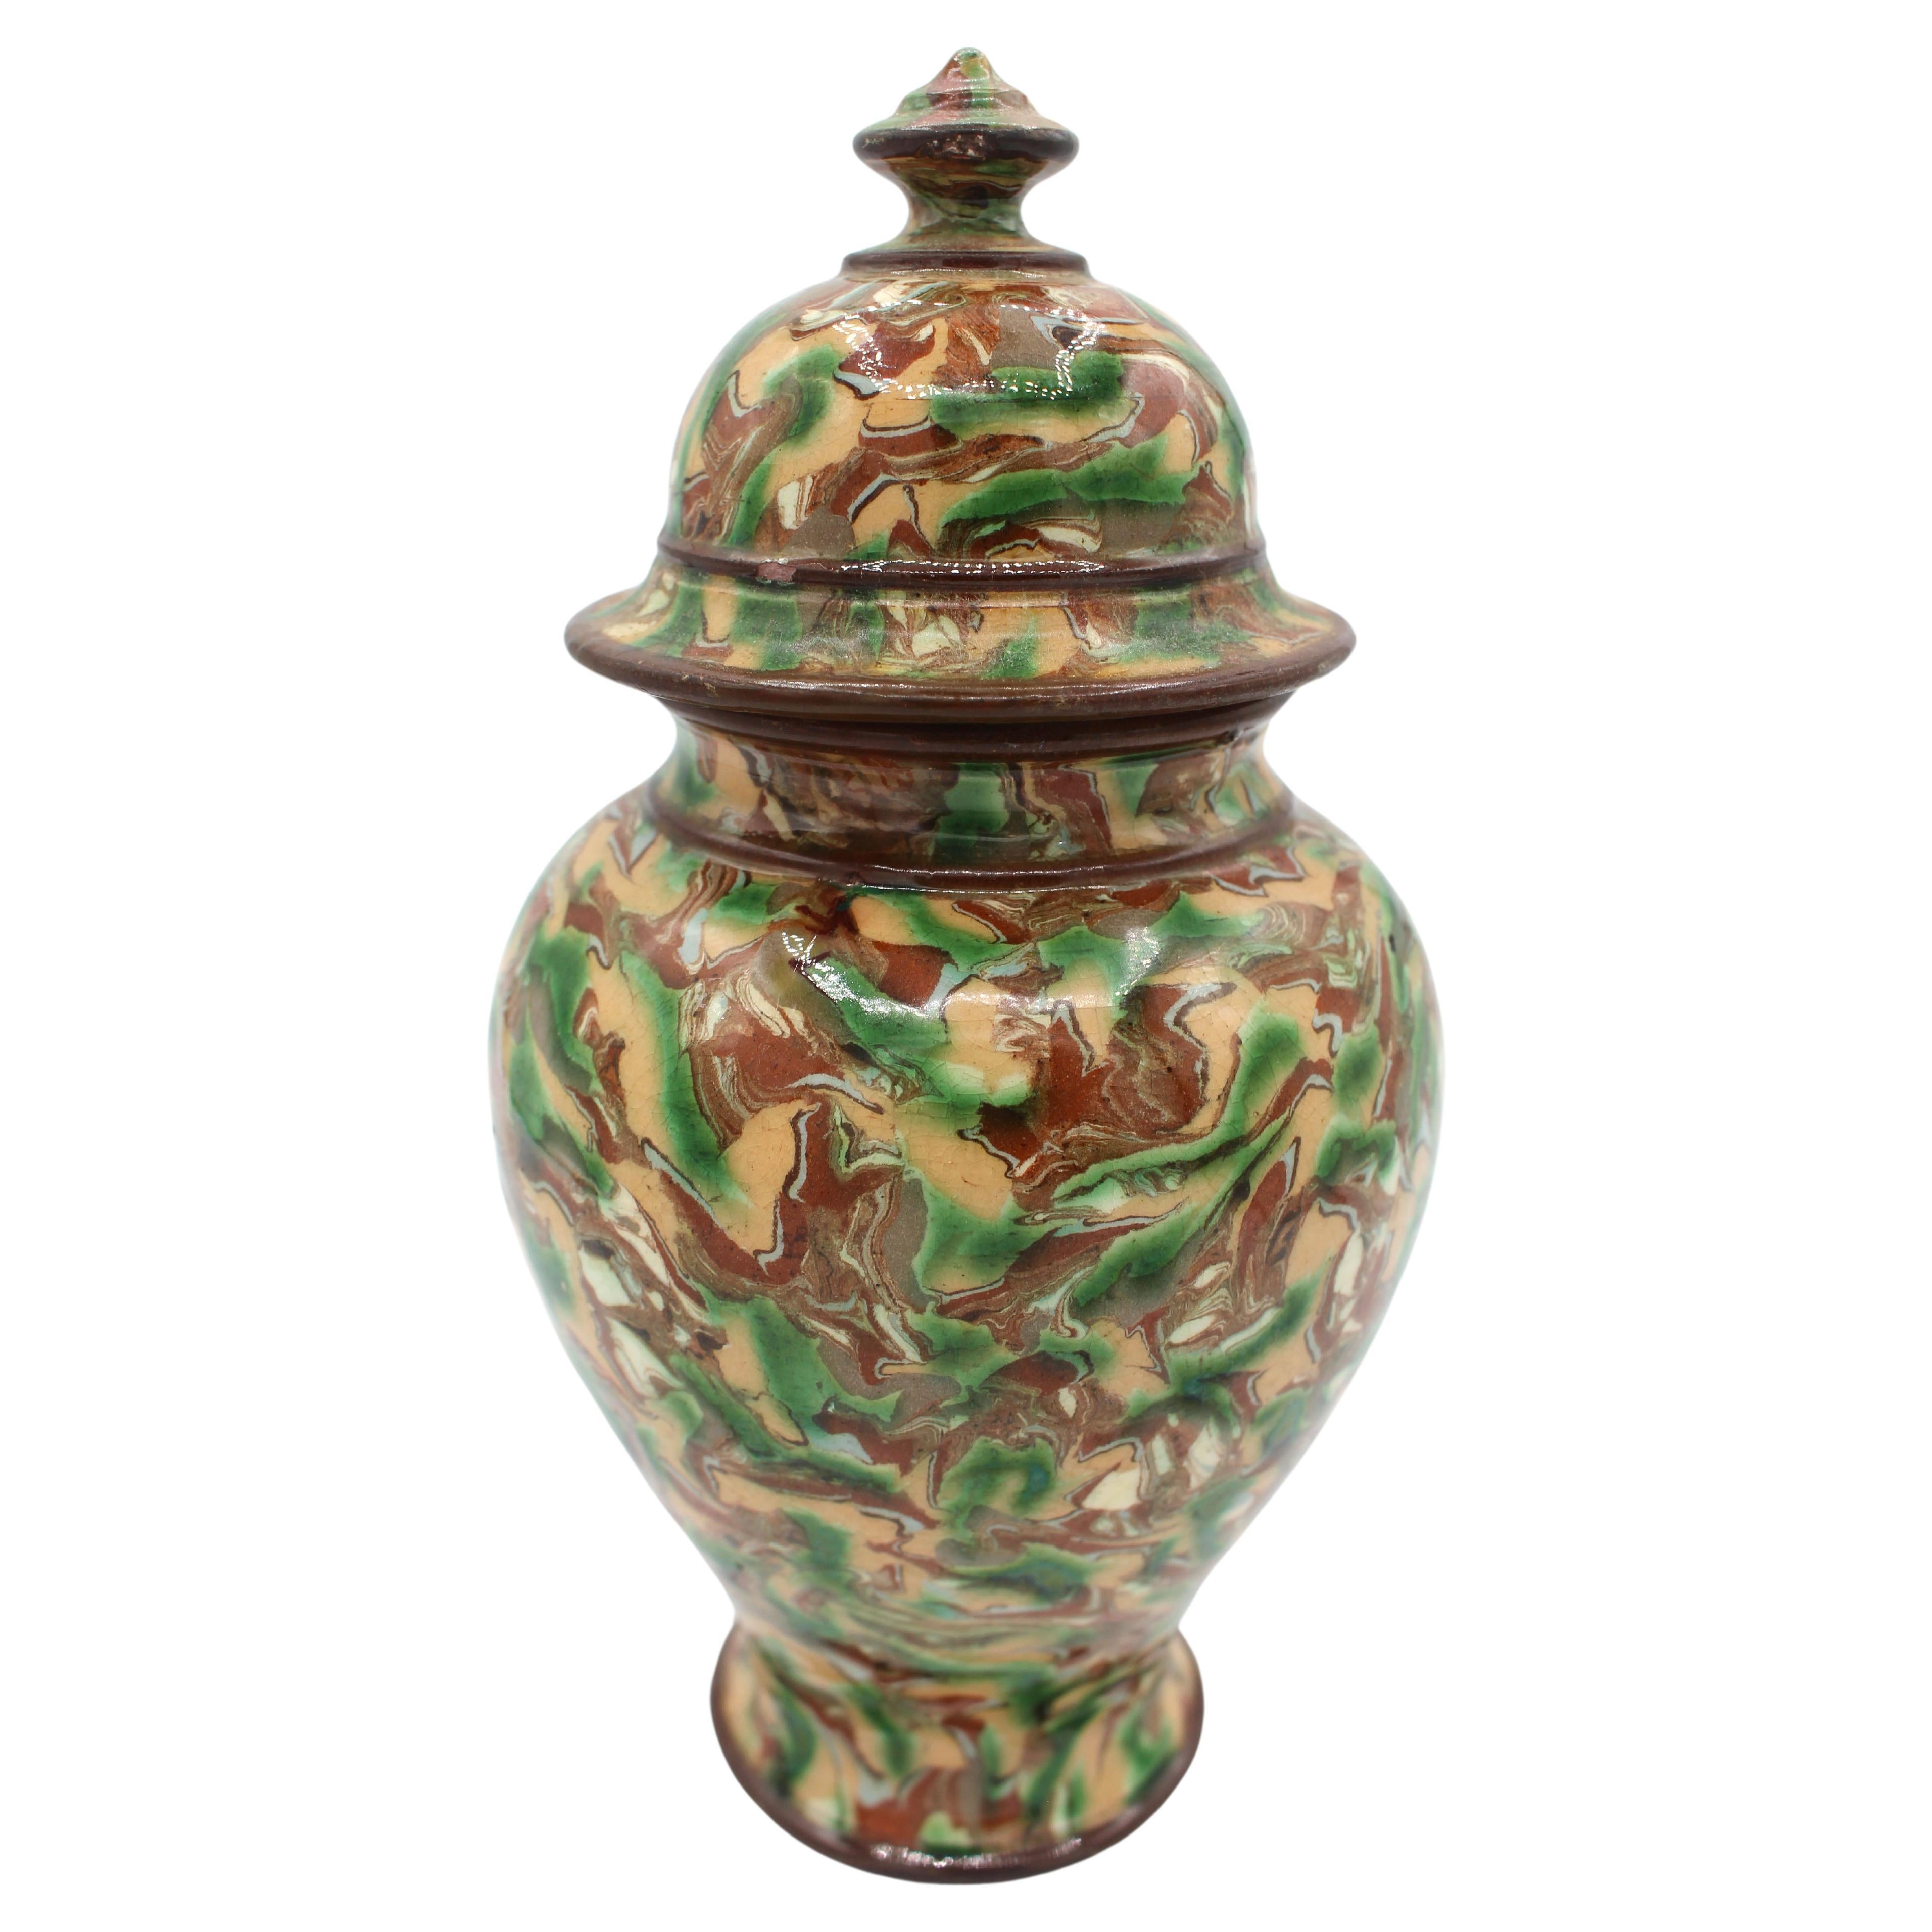 Circa 1900 Terracotta Covered Jar, French, by Maison Pichon Uzes